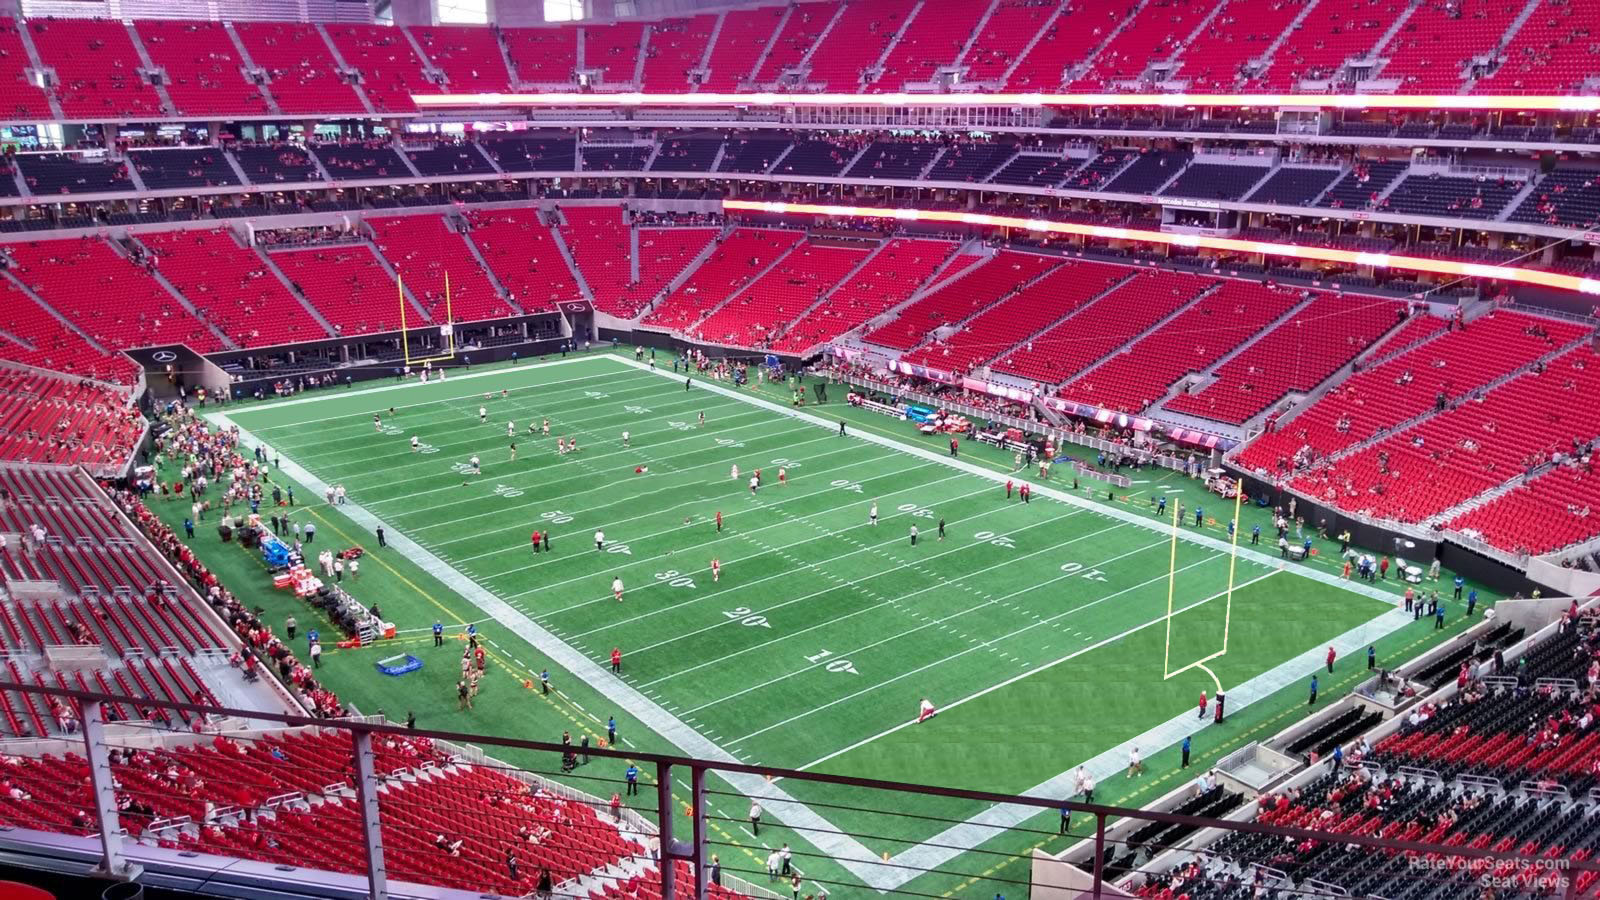 section 303, row 4 seat view  for football - mercedes-benz stadium